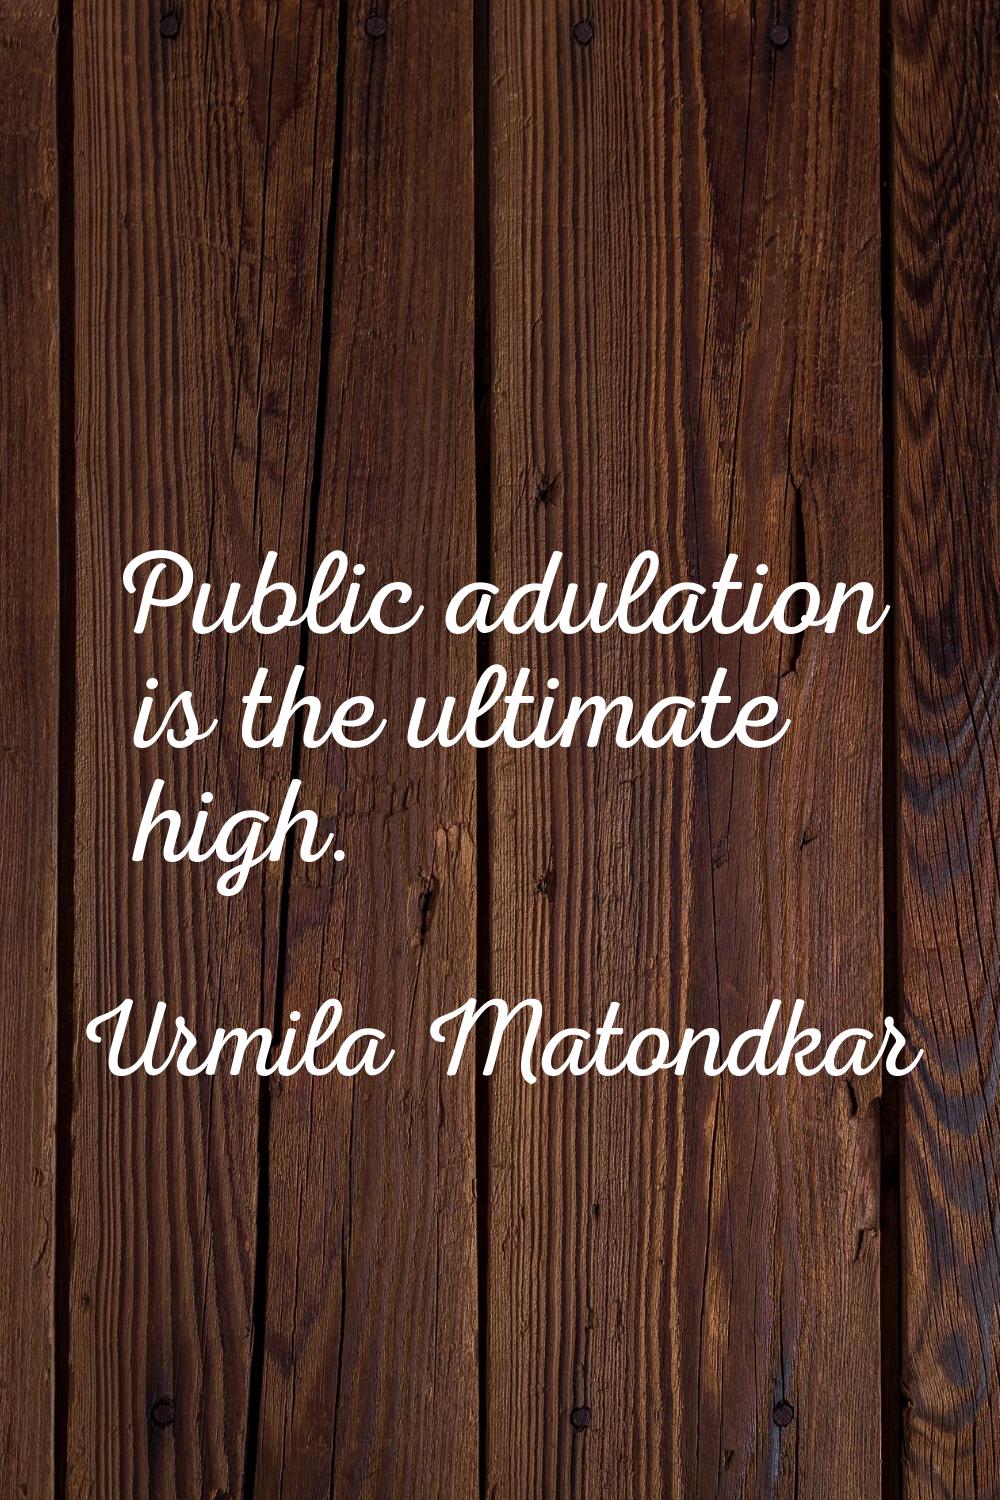 Public adulation is the ultimate high.